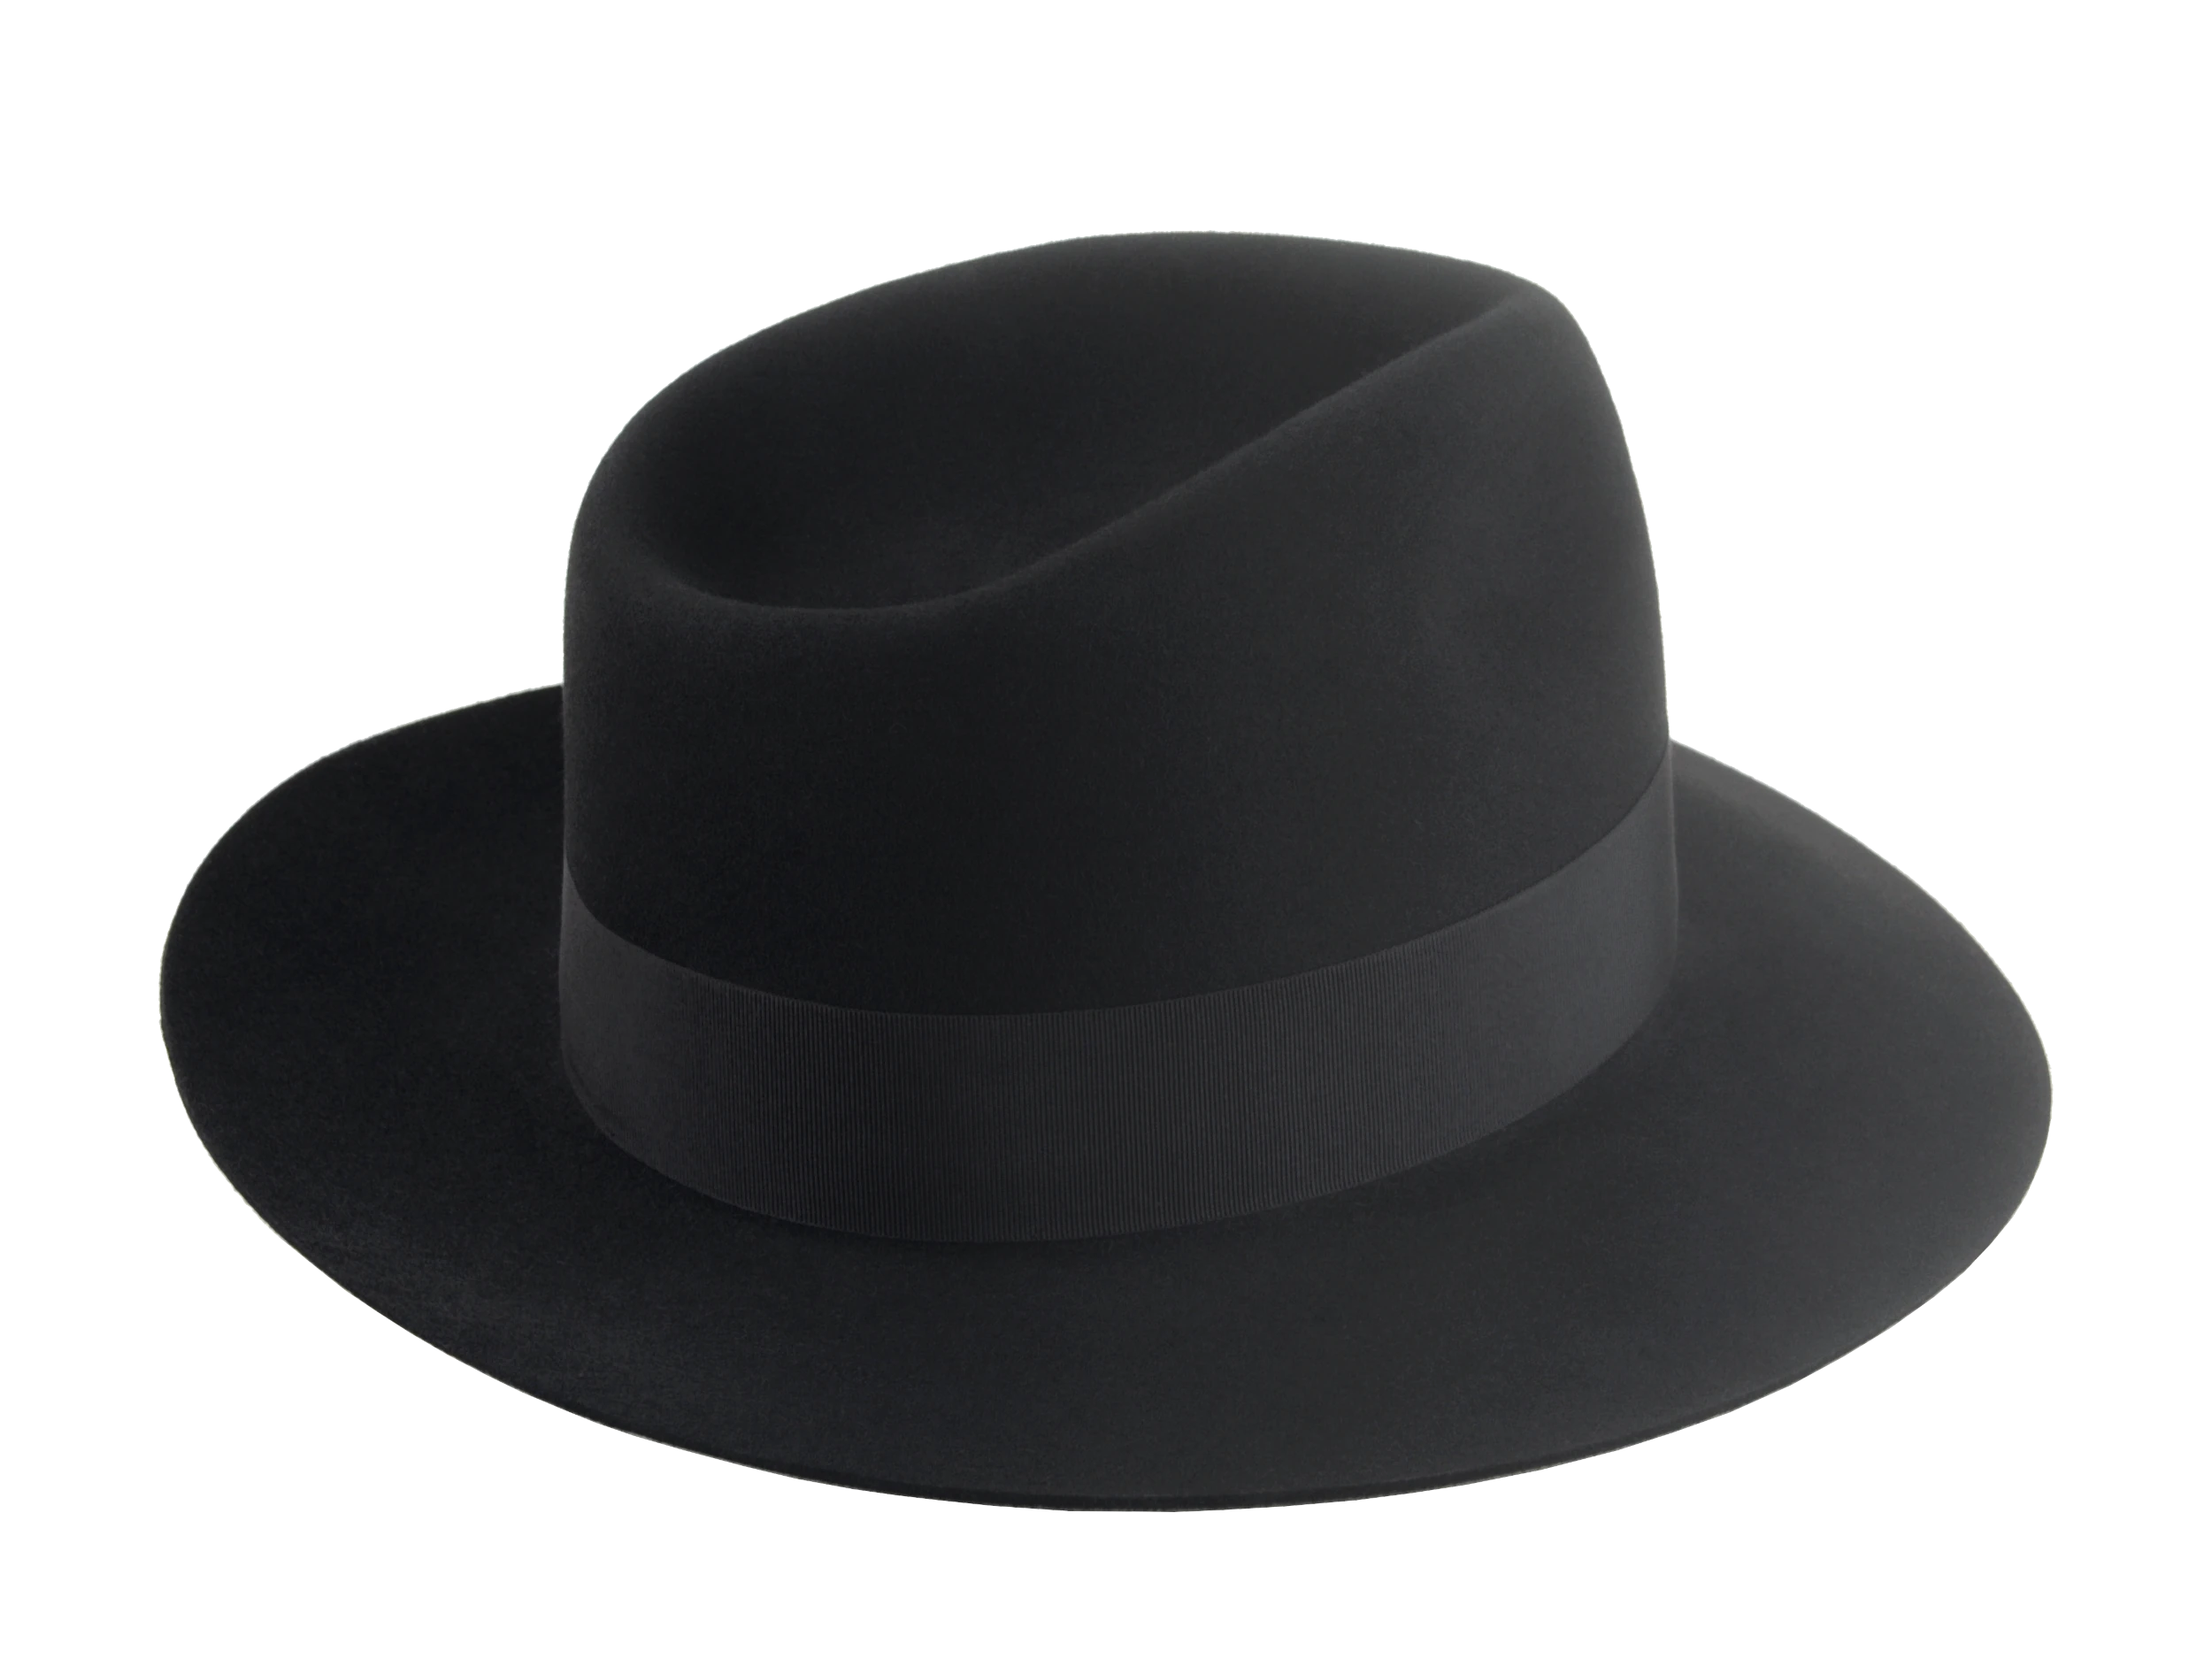 The Regent: Angled view illustrating the hat's seamless and smooth surface finish | Agnoulita Hats